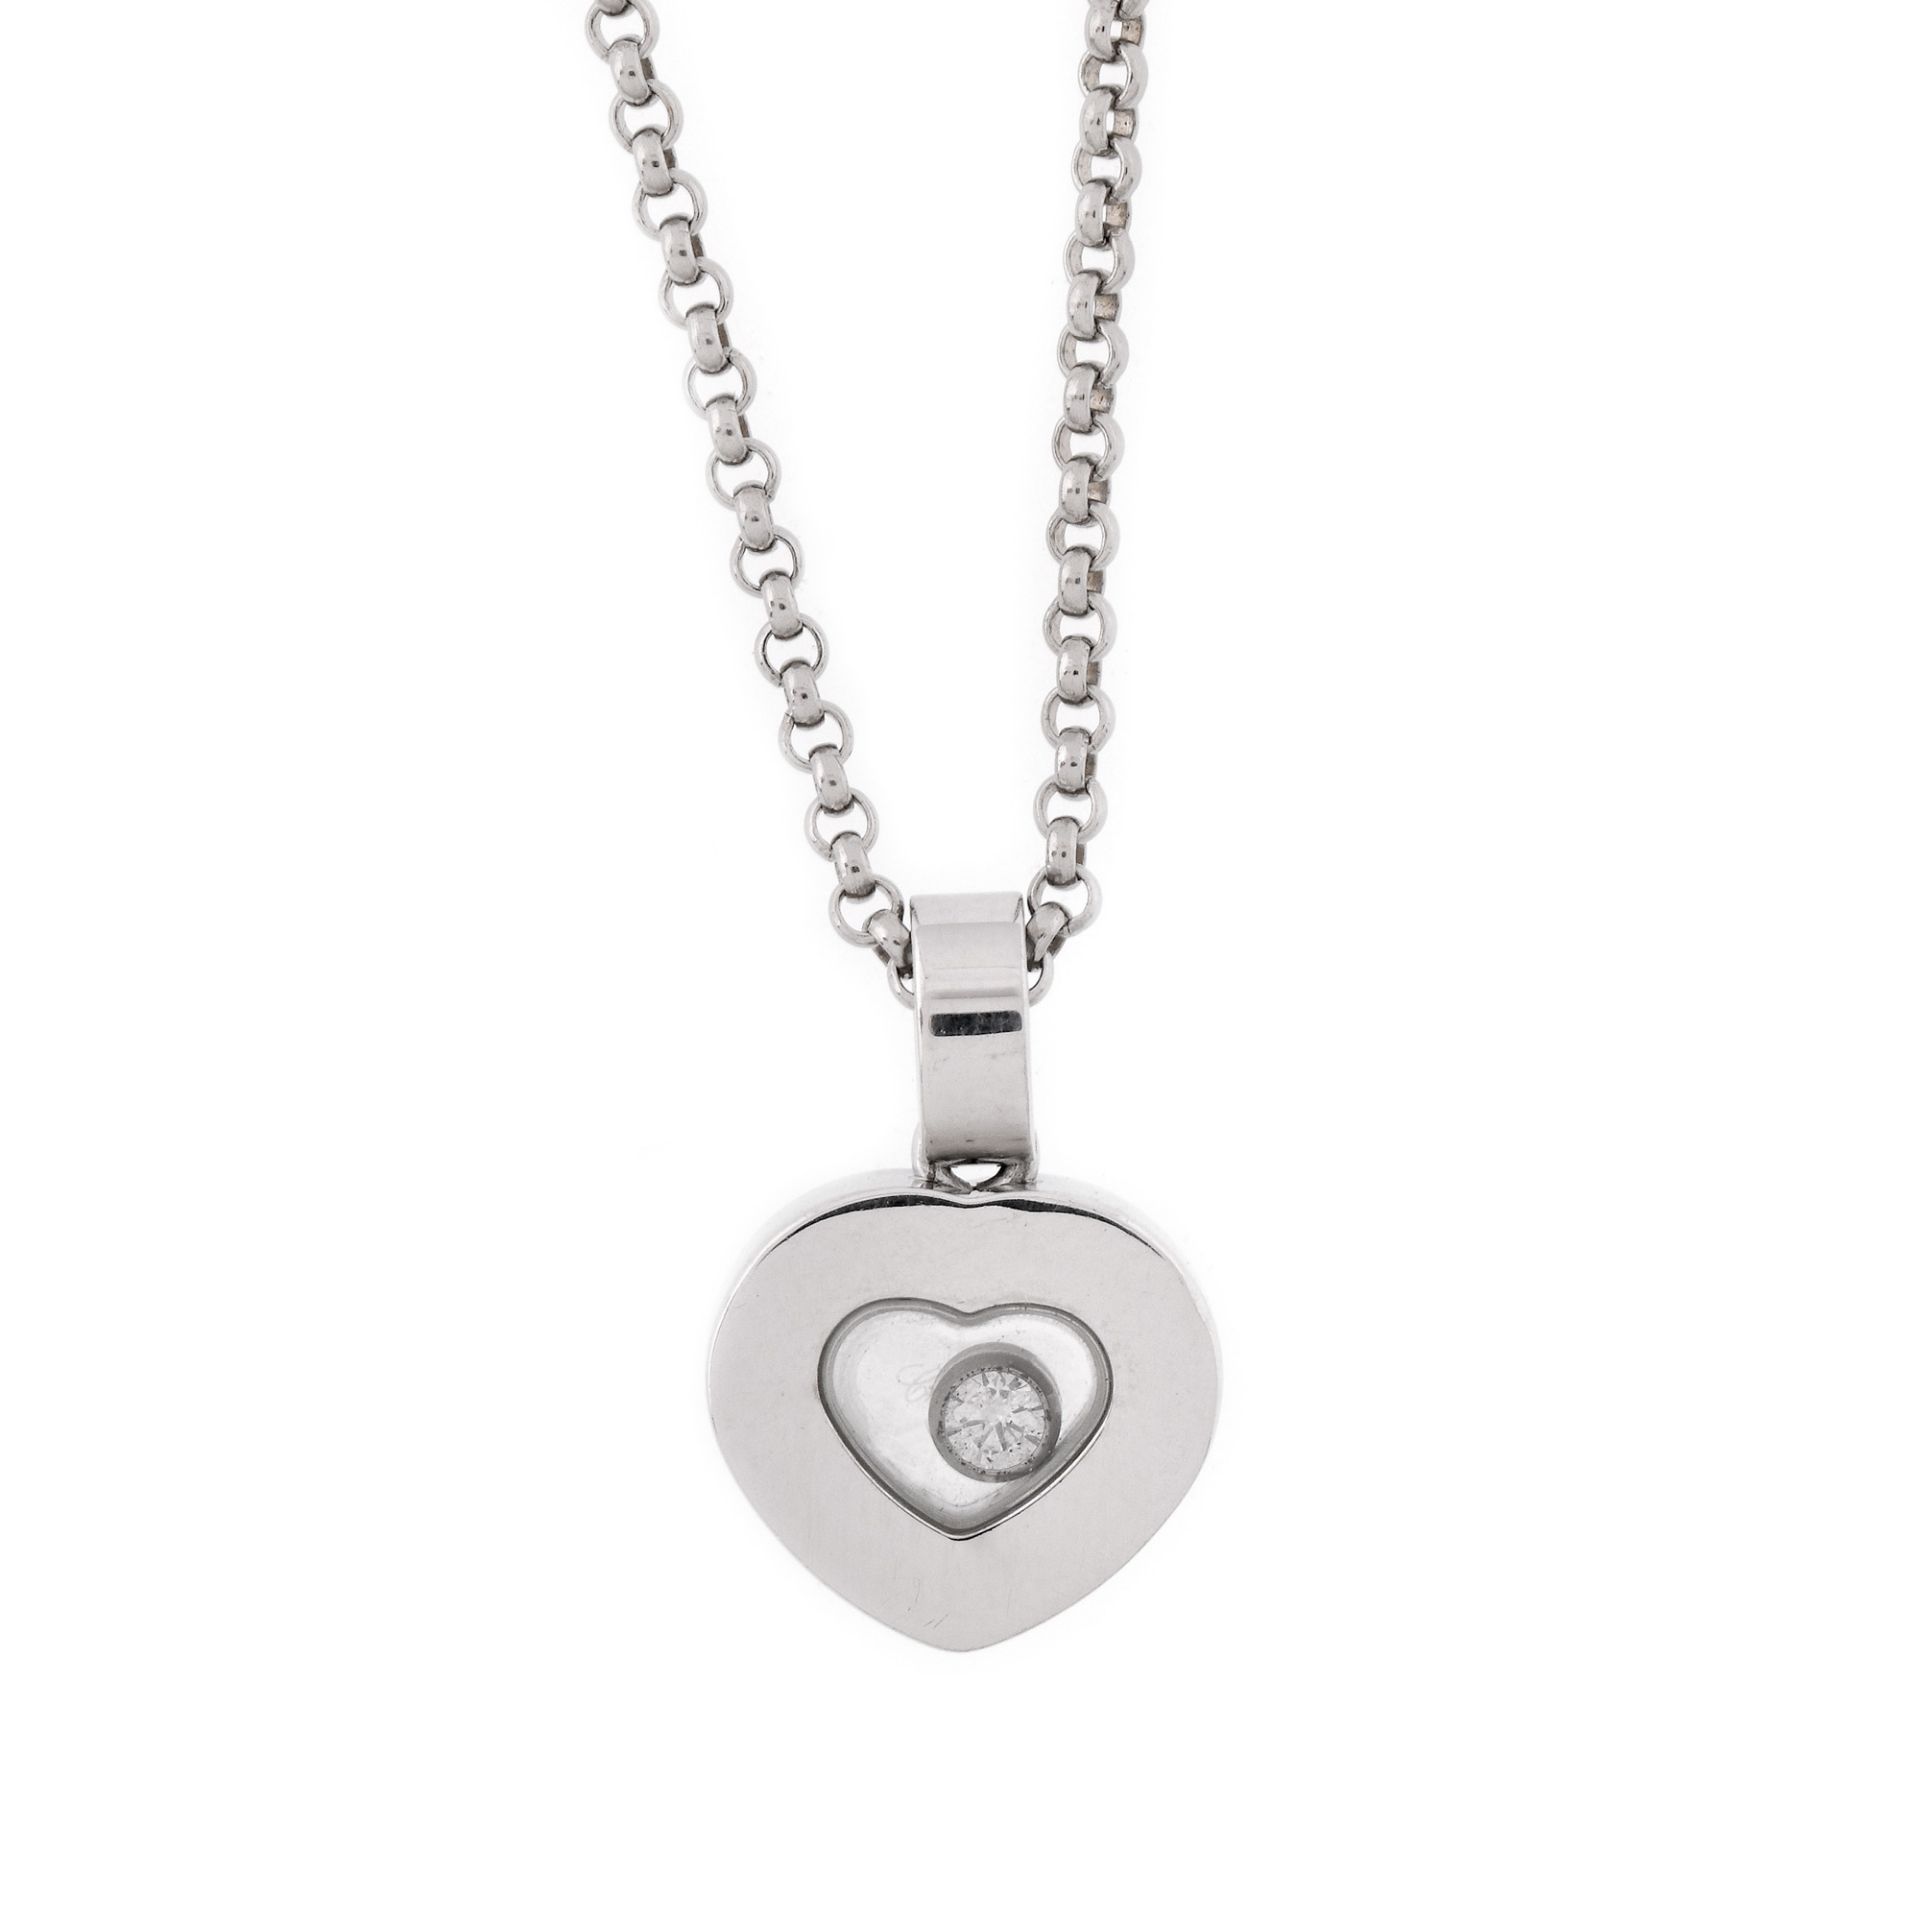 Chopard chain with pendant, white gold, decorated with a moving diamond